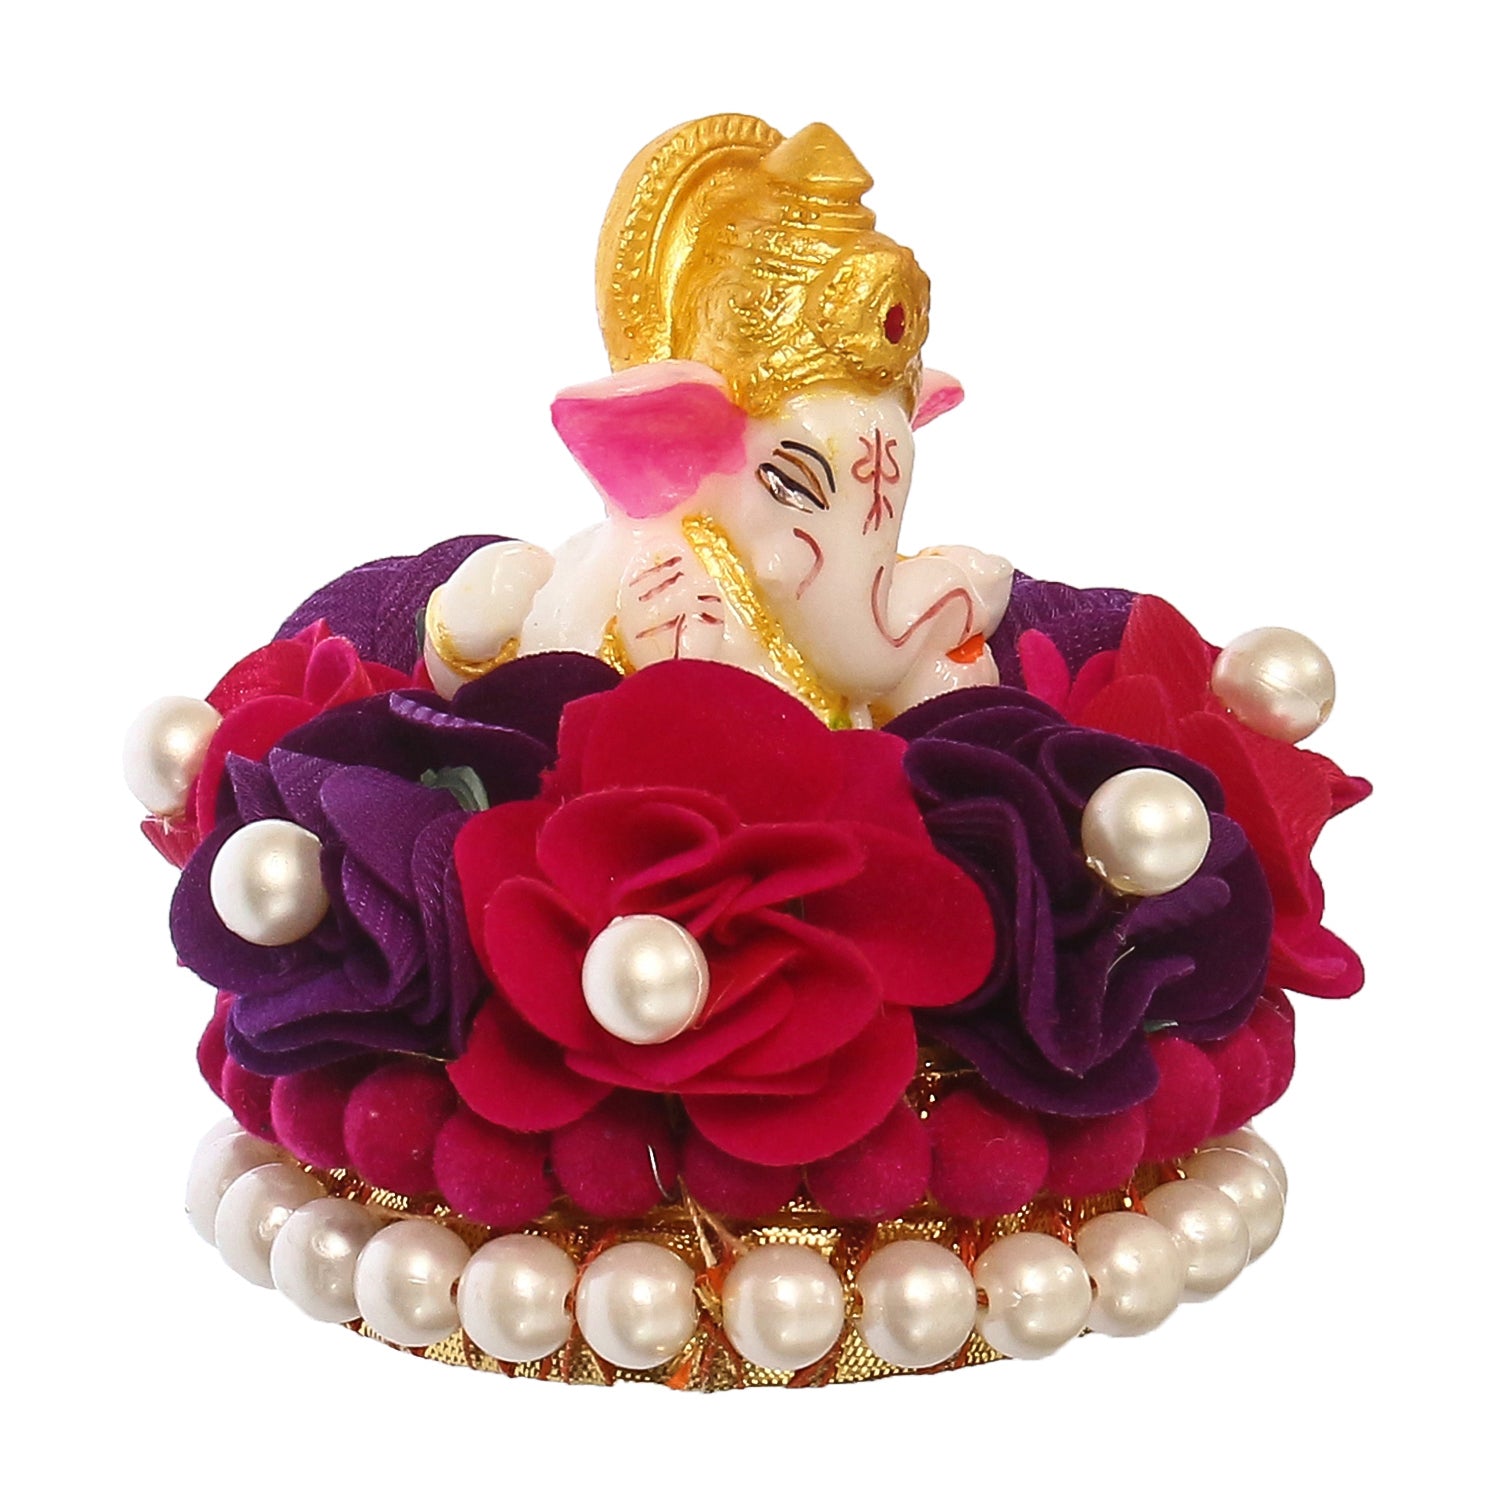 Lord Ganesha Idol On Decorative Handcrafted Red And Purple Flowers Plate 4